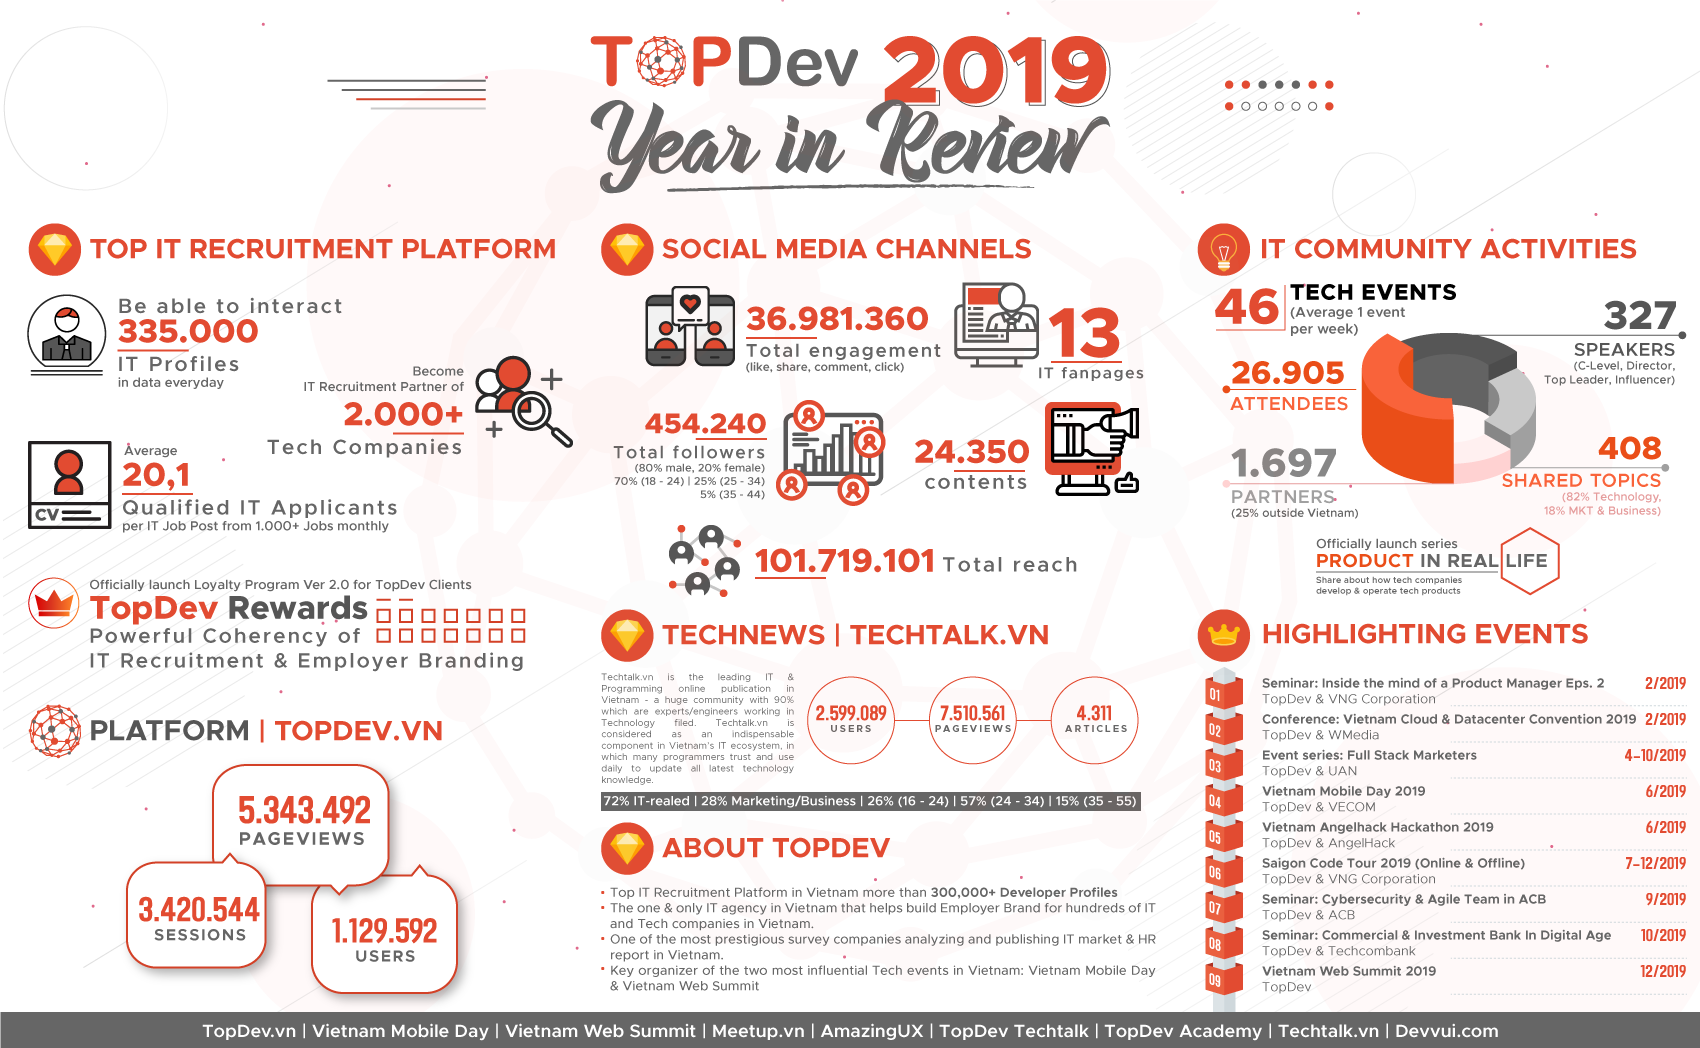 TopDev 2019 Year in Review